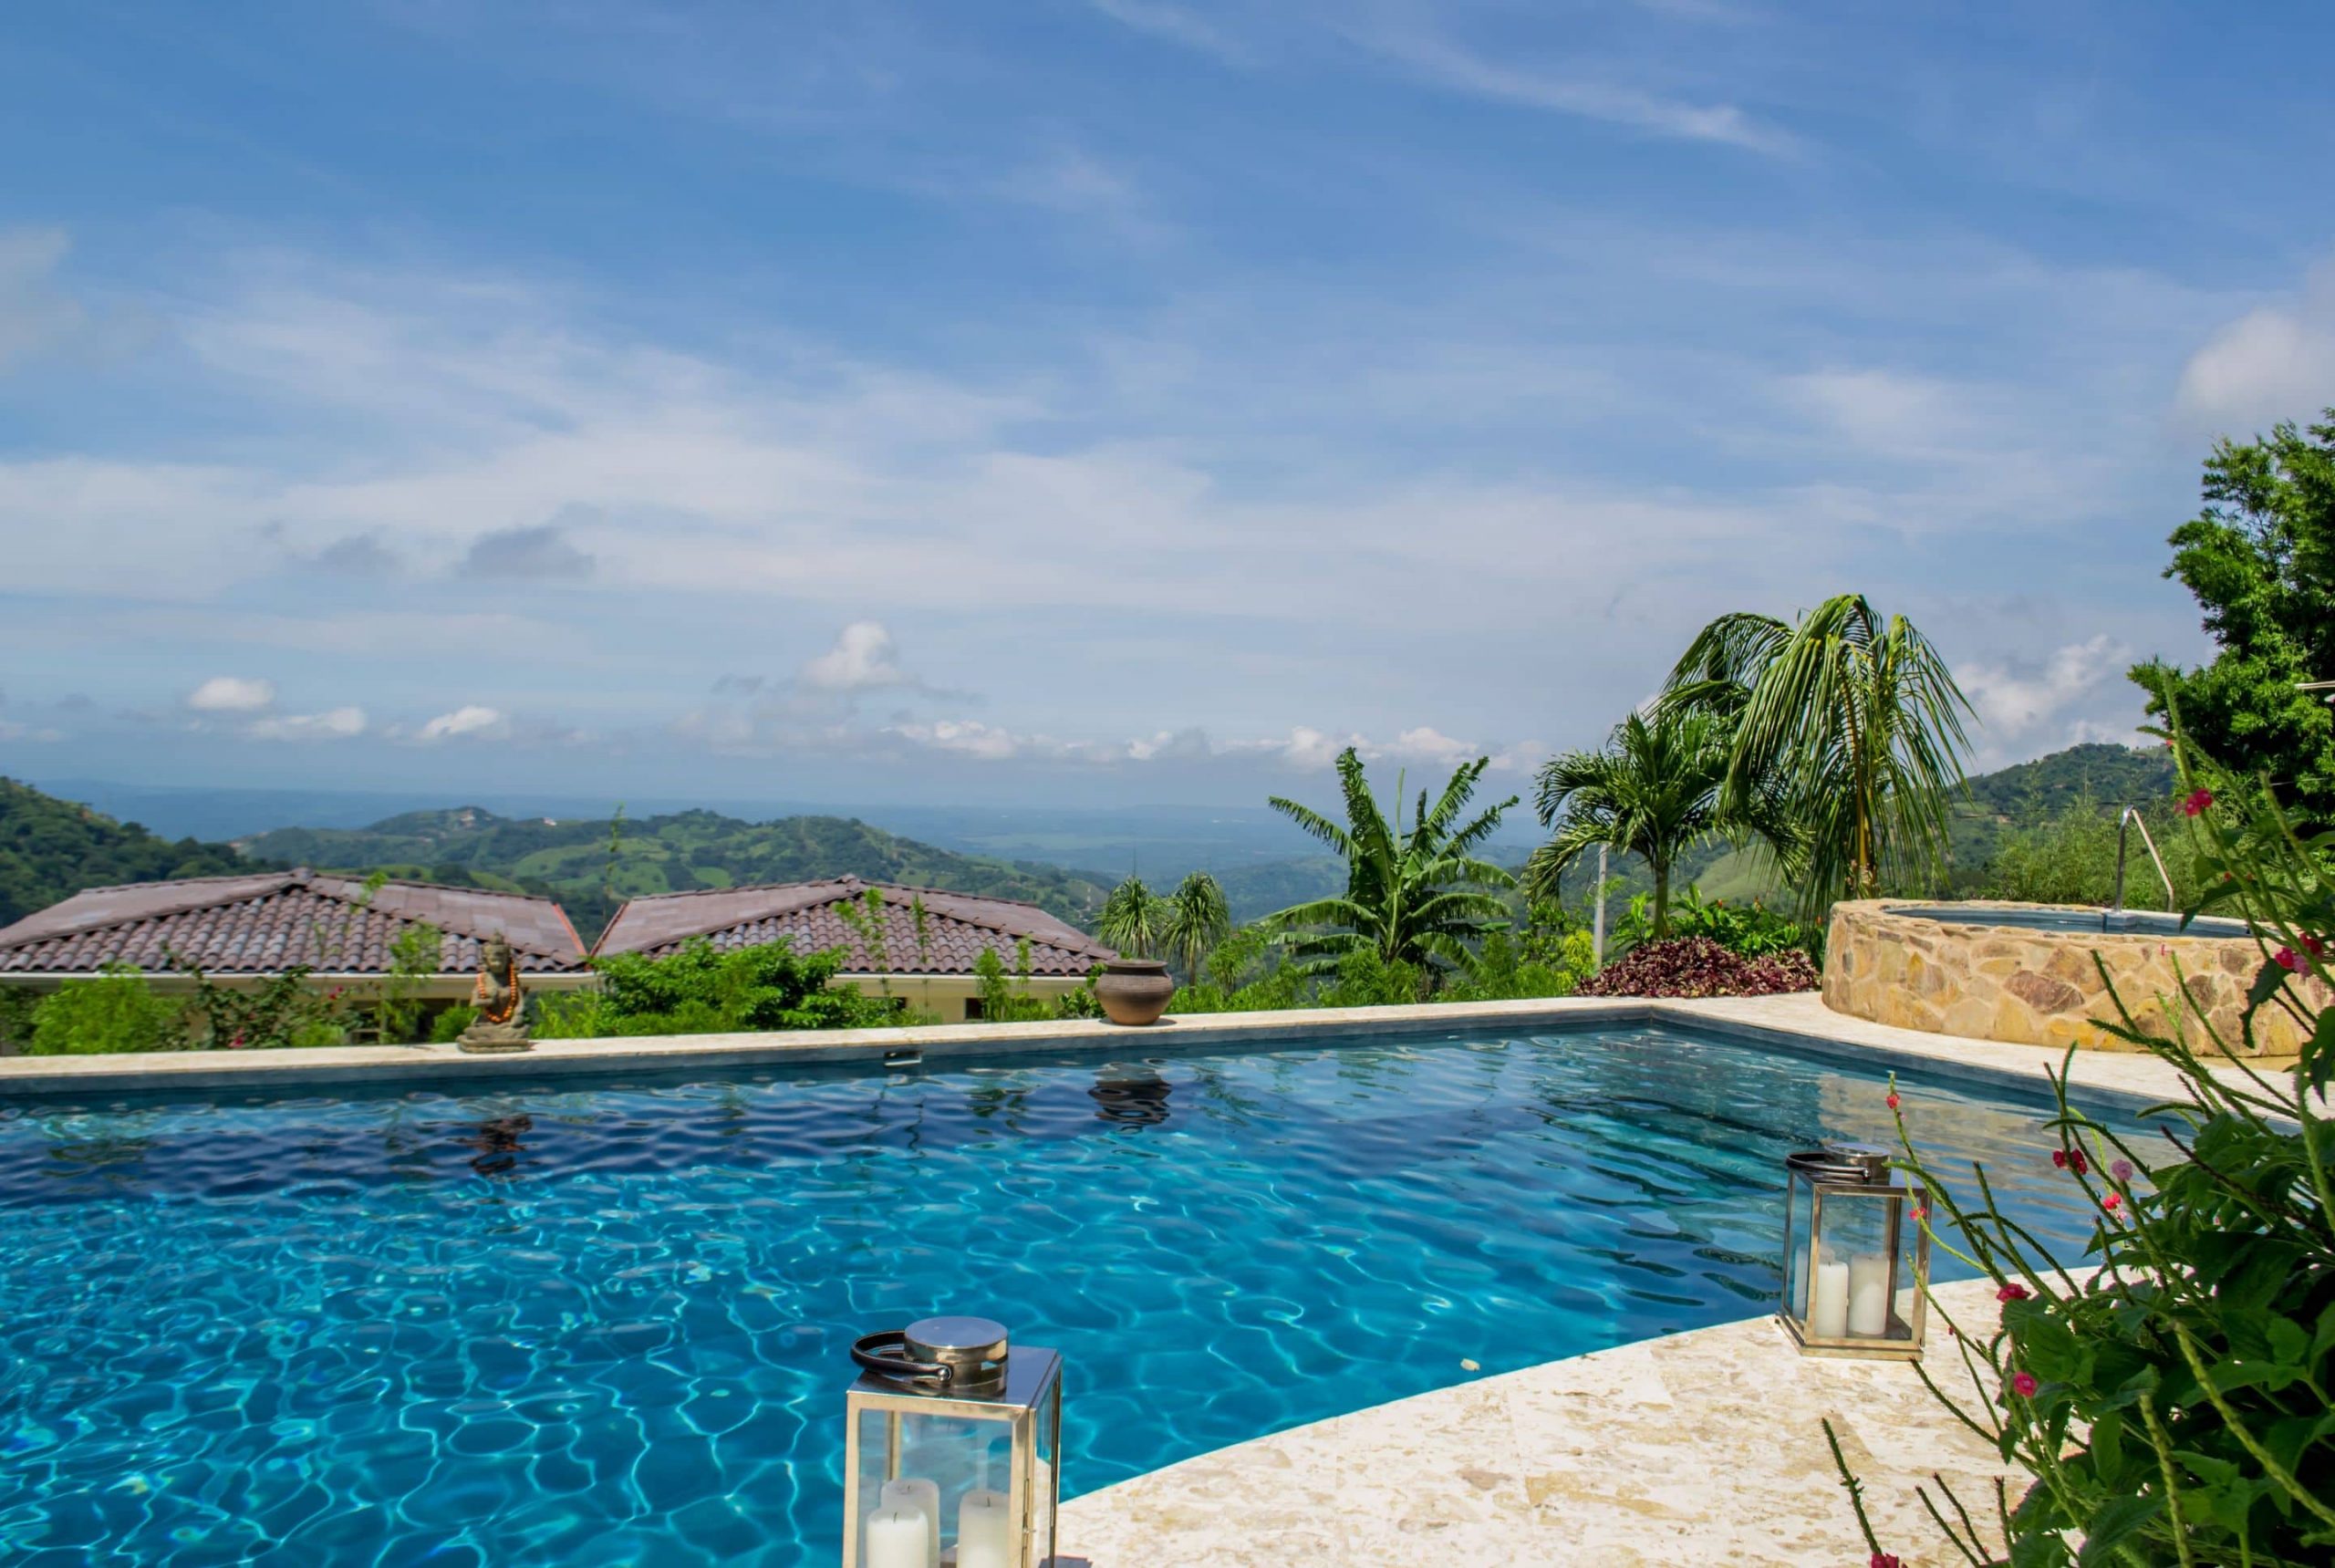 Outdoor pool with beautiful blue water and view of the Costa Rican canopy and ocean horizon at The Retreat.